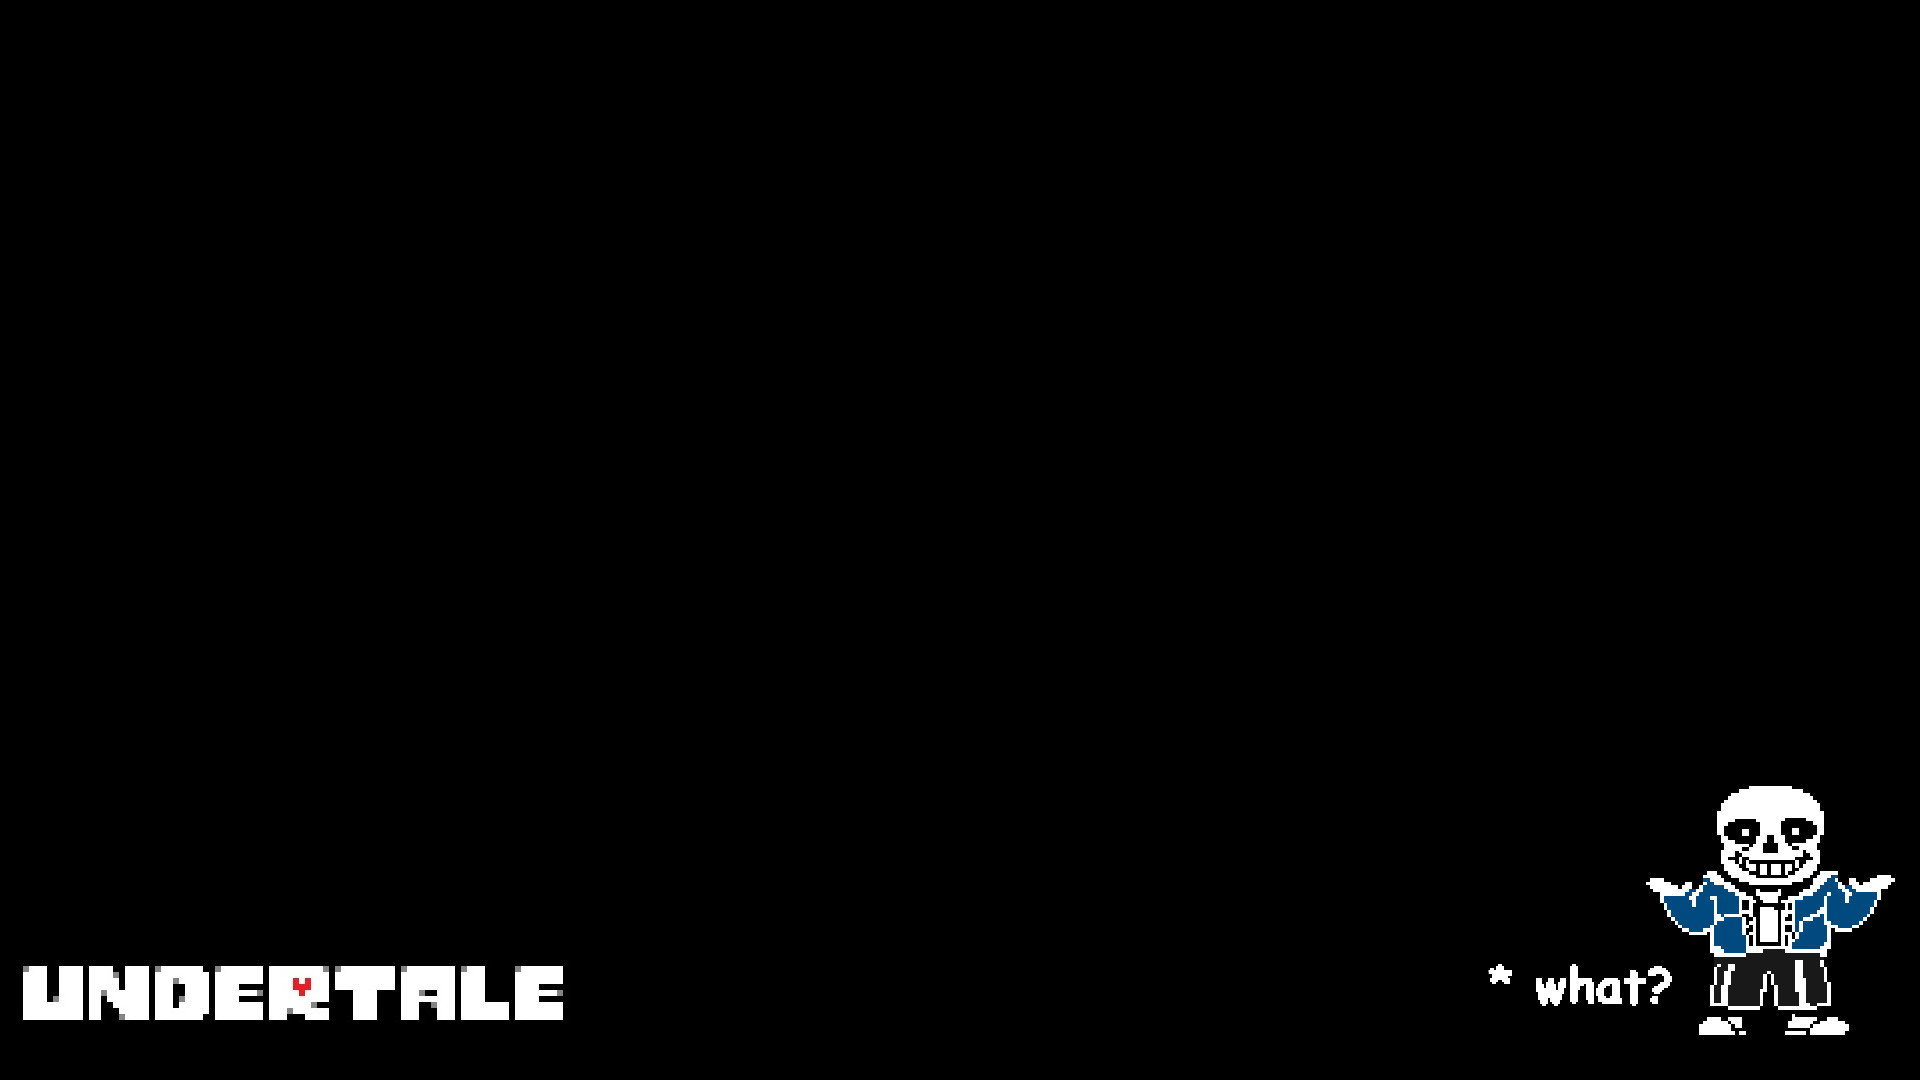 1920x1080 Made a quick wallpaper for Undertale. Check it out.